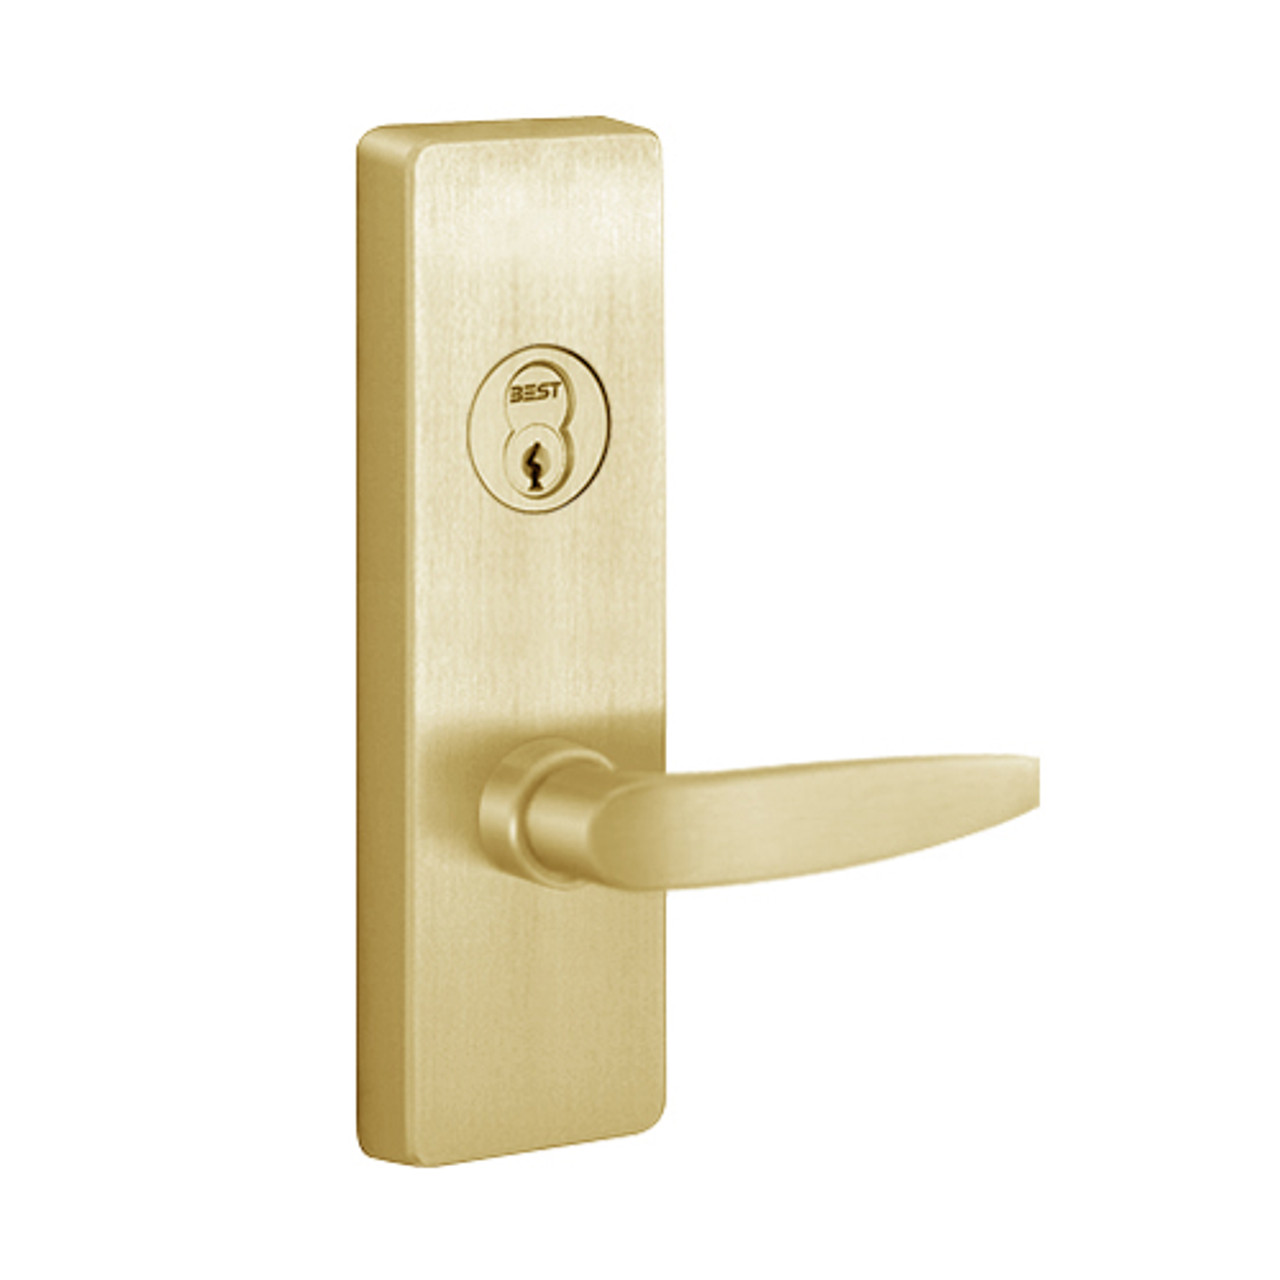 RVM4908B-606-RHR PHI Key Controls Lever Vandal Resistant Retrofit Trim with B Lever Design for Apex and Olympian Series Exit Device in Satin Brass Finish